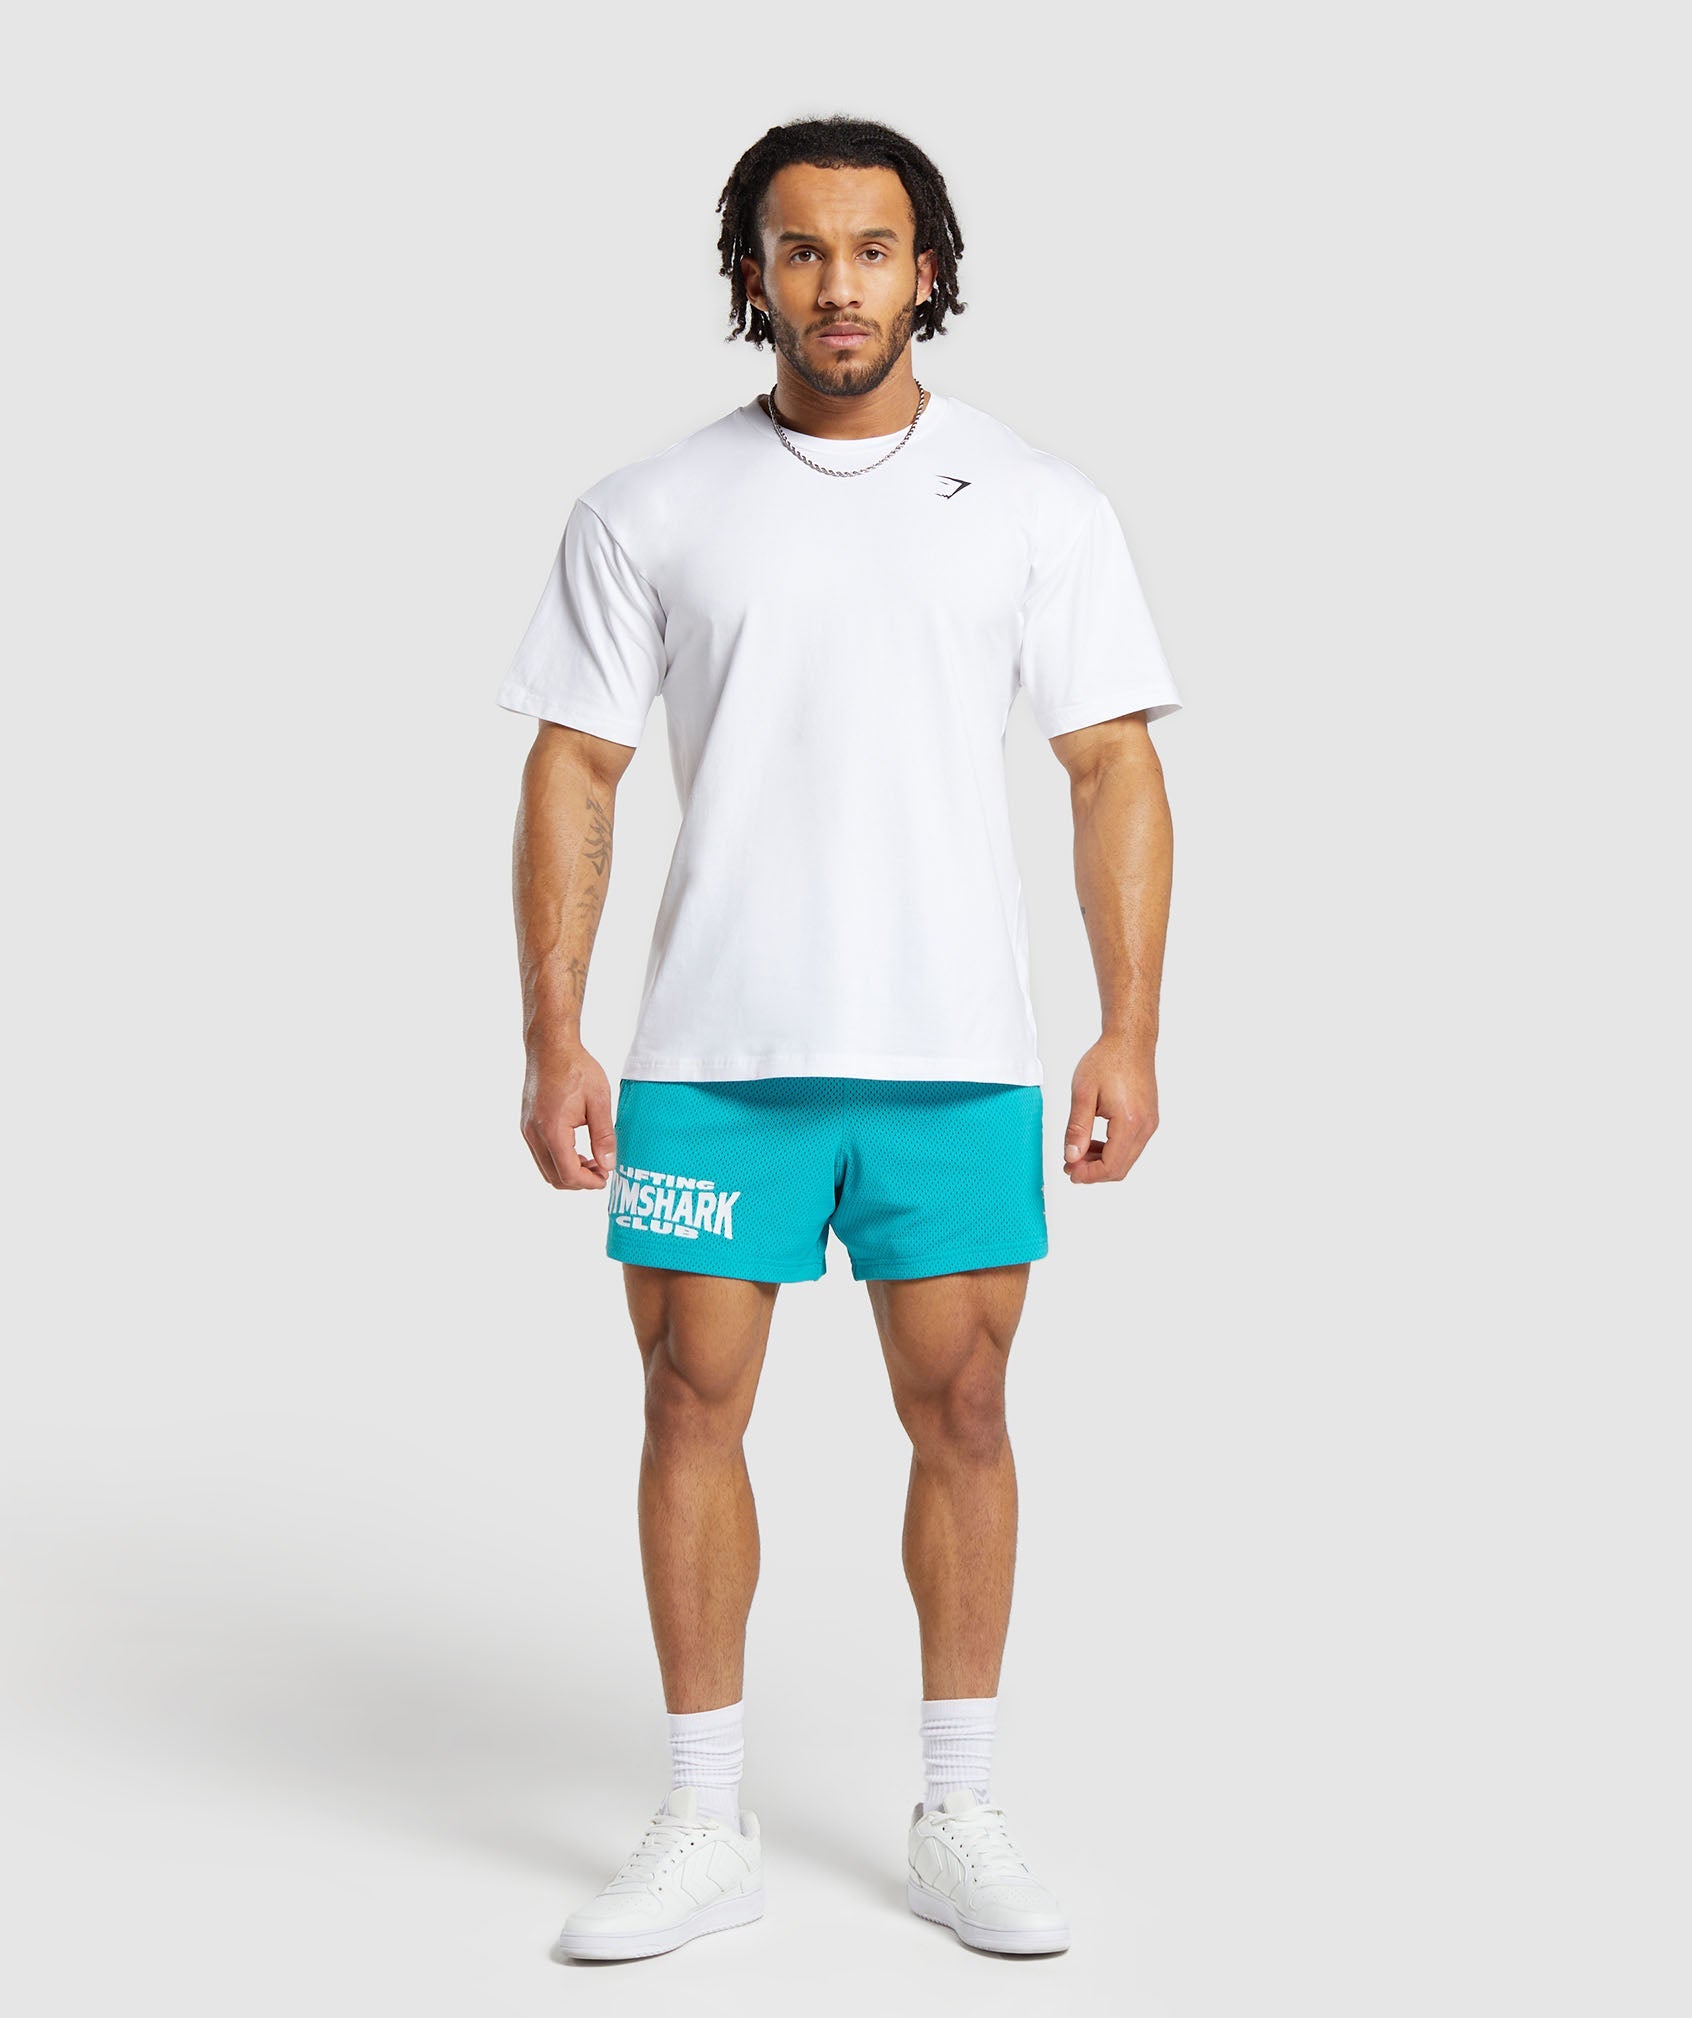 Lifting Club Mesh 5" Shorts in Artificial Teal - view 4